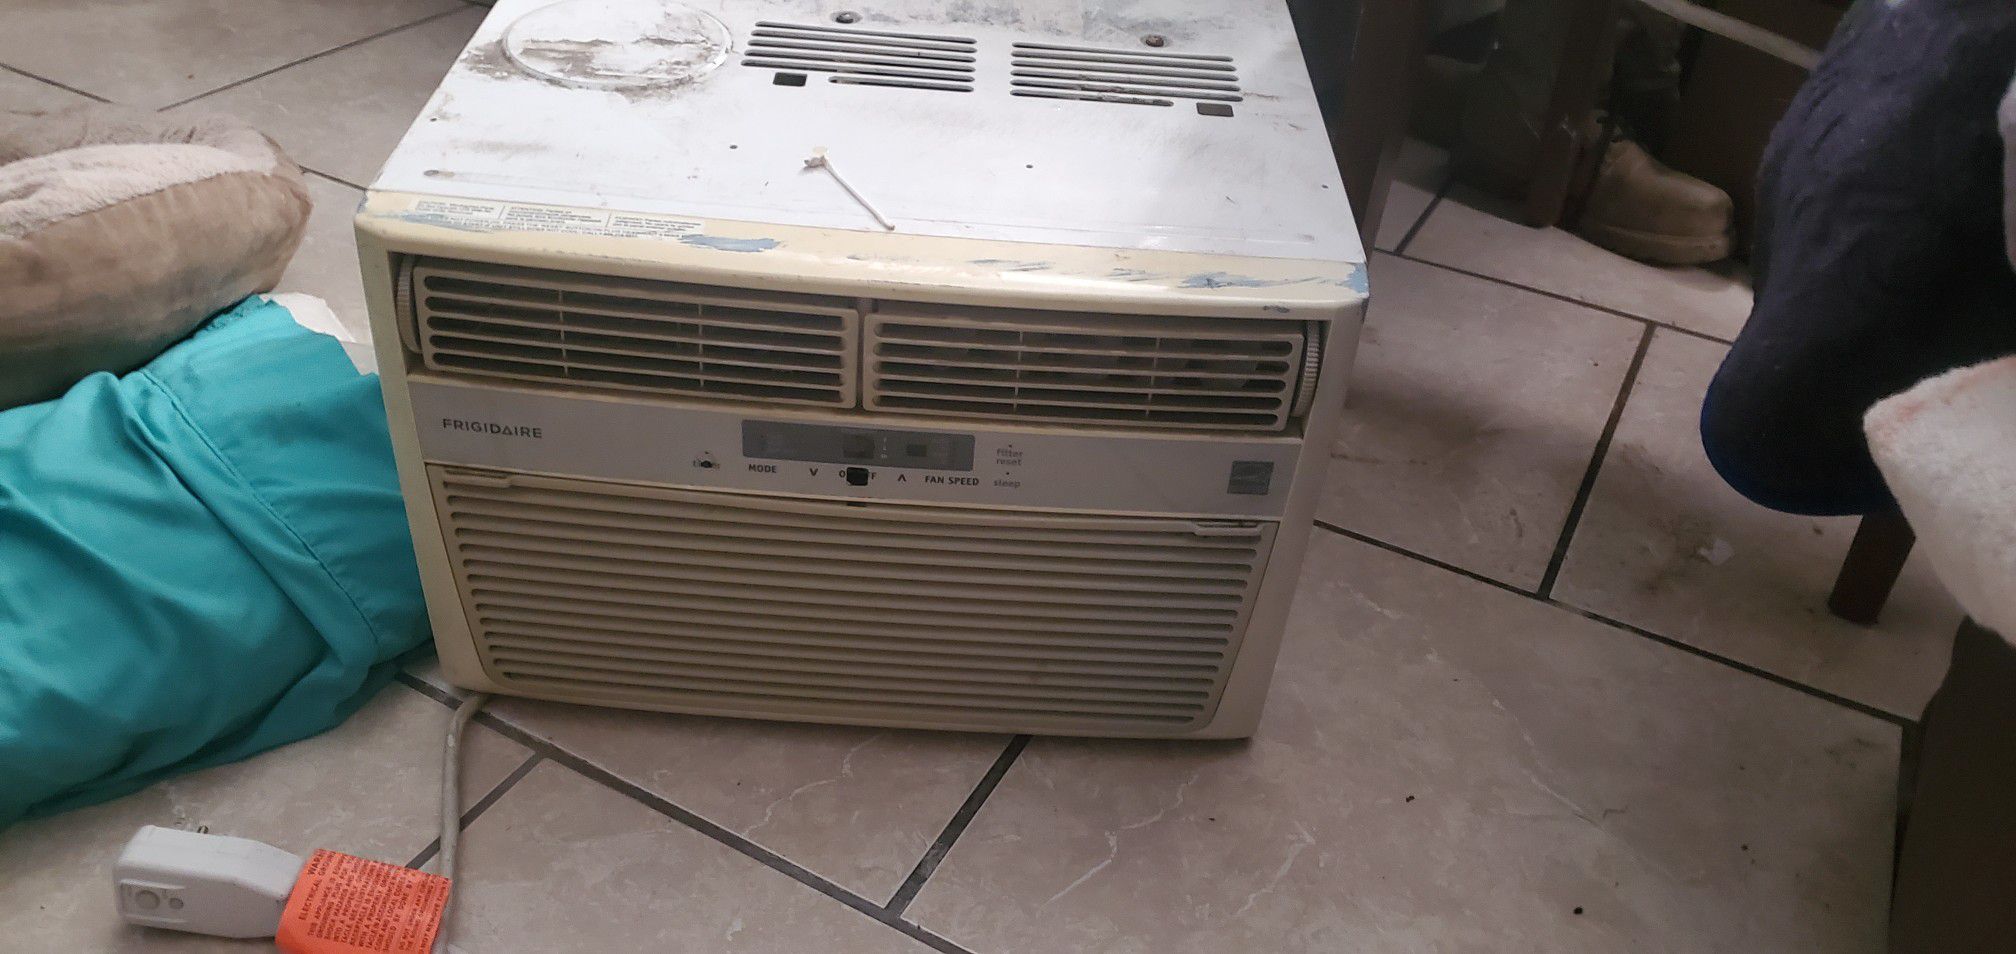 Ac Frigidaire works great perfect for a mid size room